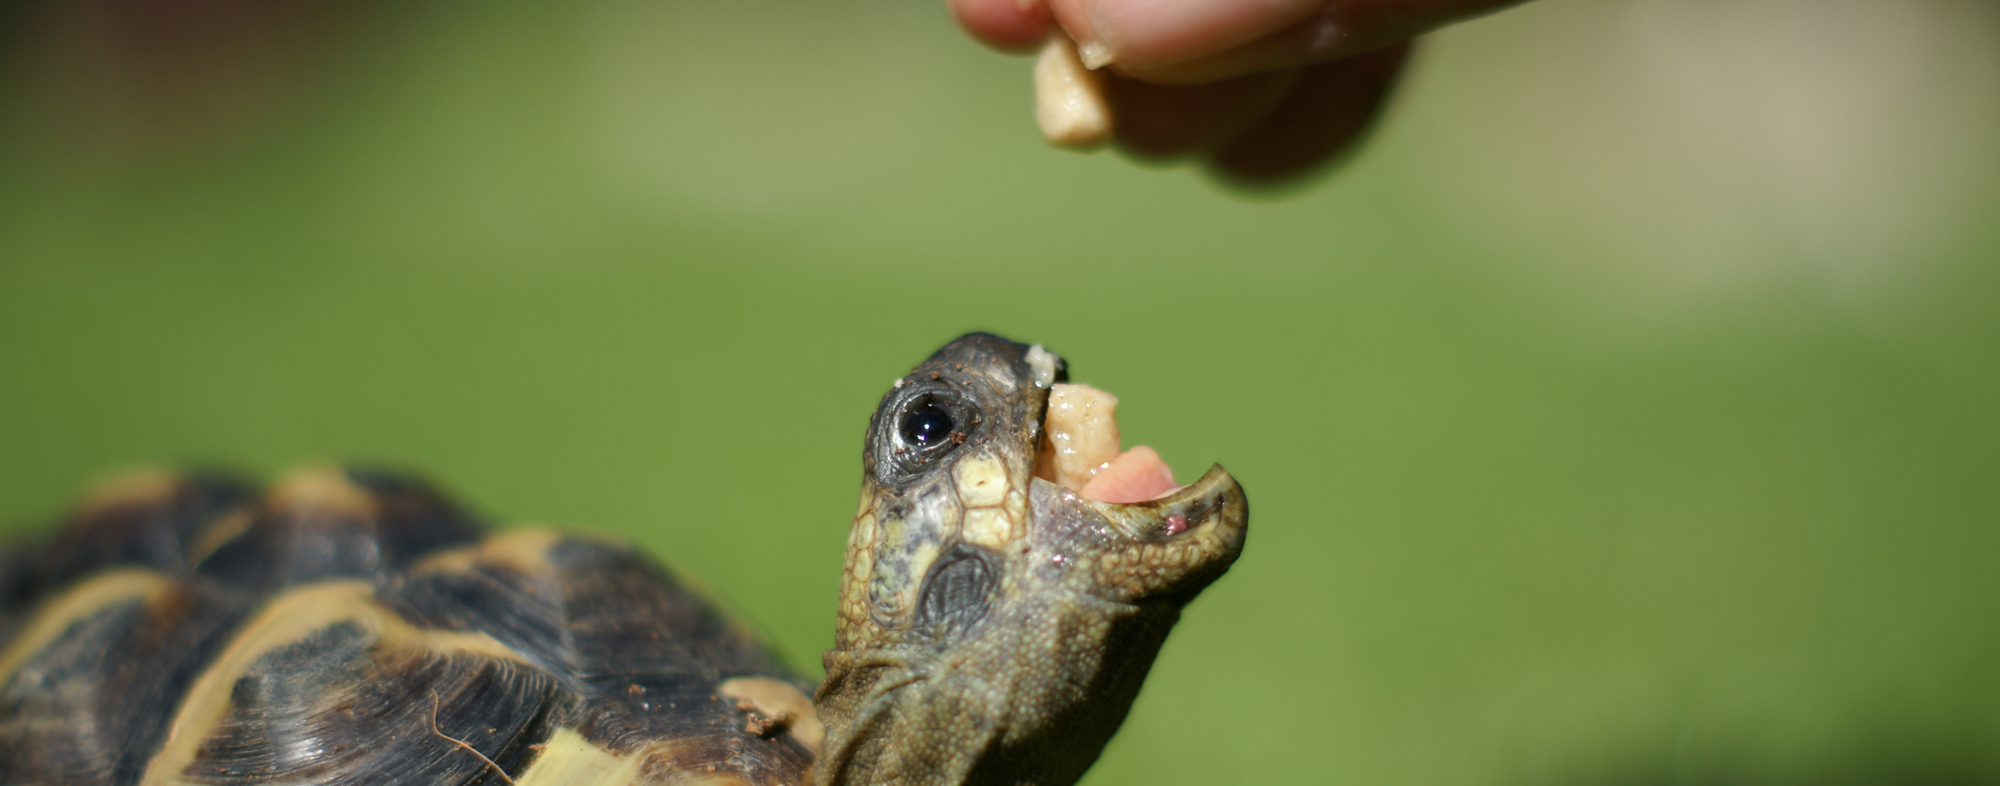 A small turtle with their mouth open in anticipation of a vegetable treat